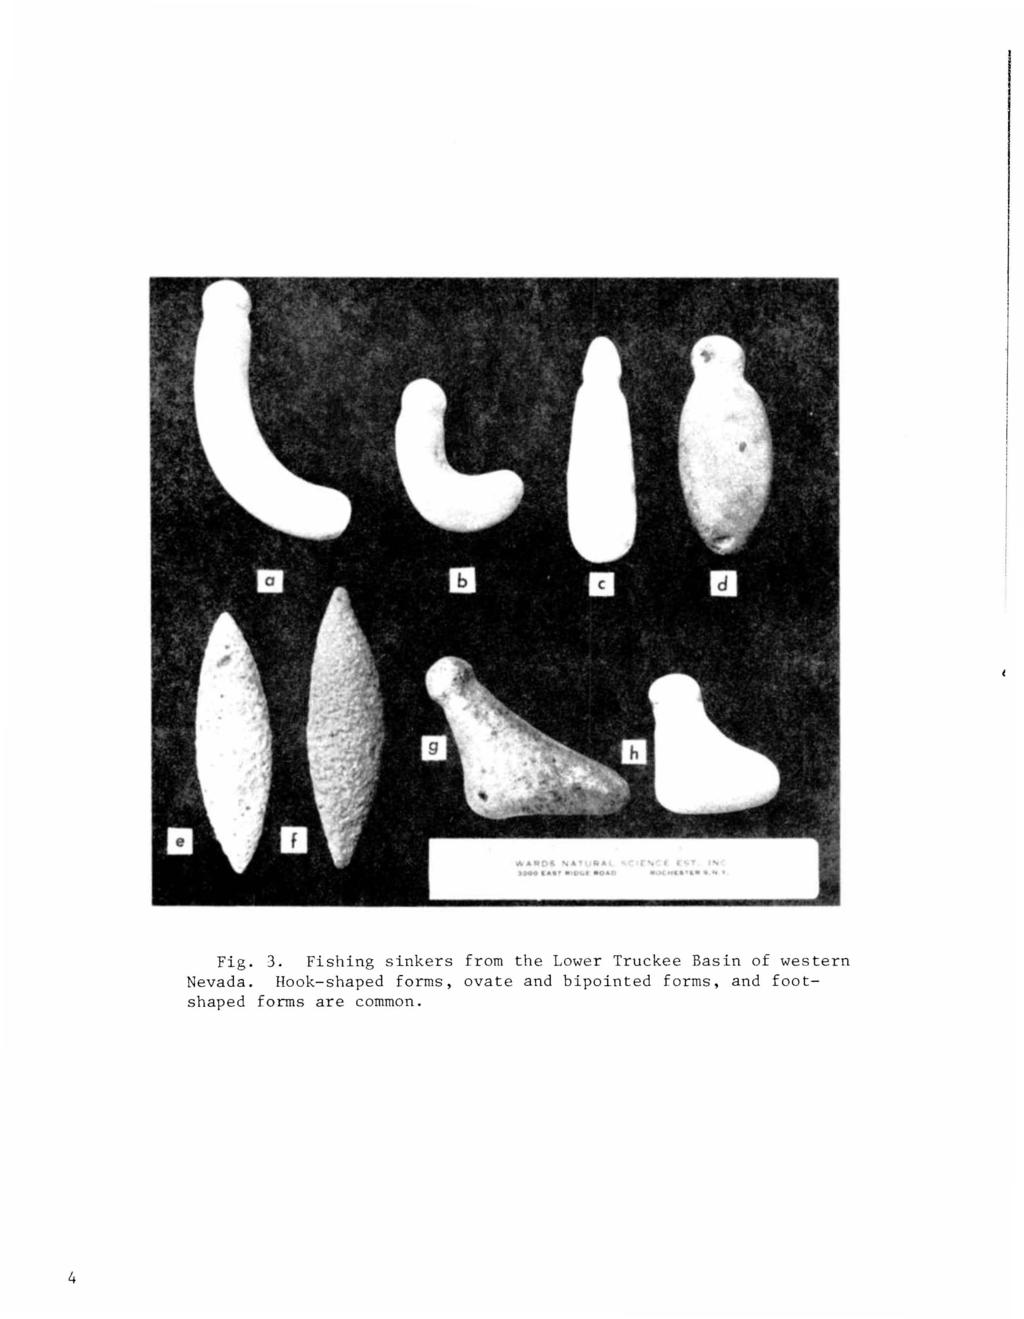 Fig. 3. Fishing sinkers from the Lower Truckee Basin of western Nevada.